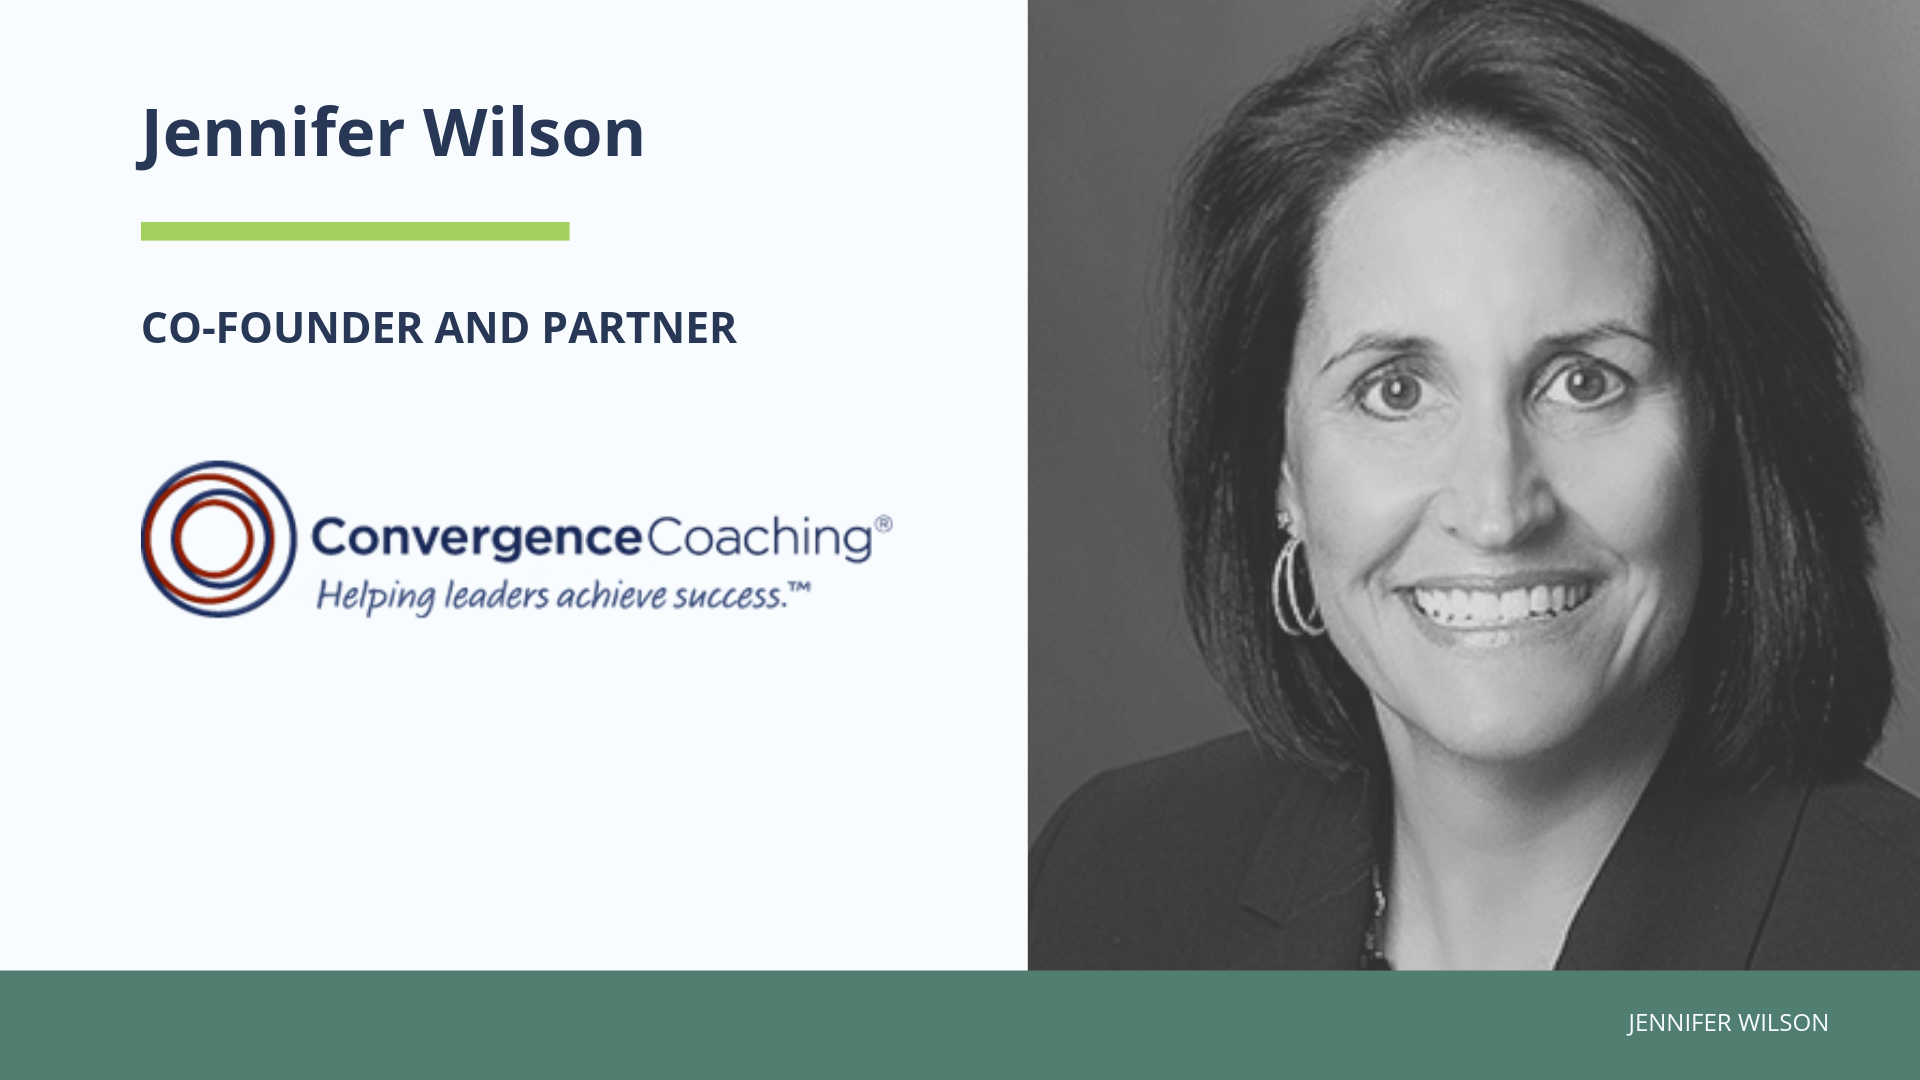 ConvergenceCoaching Partner and Co-Founder Jennifer Wilson Inducted into CPA Practice Advisor Accounting Hall of Fame